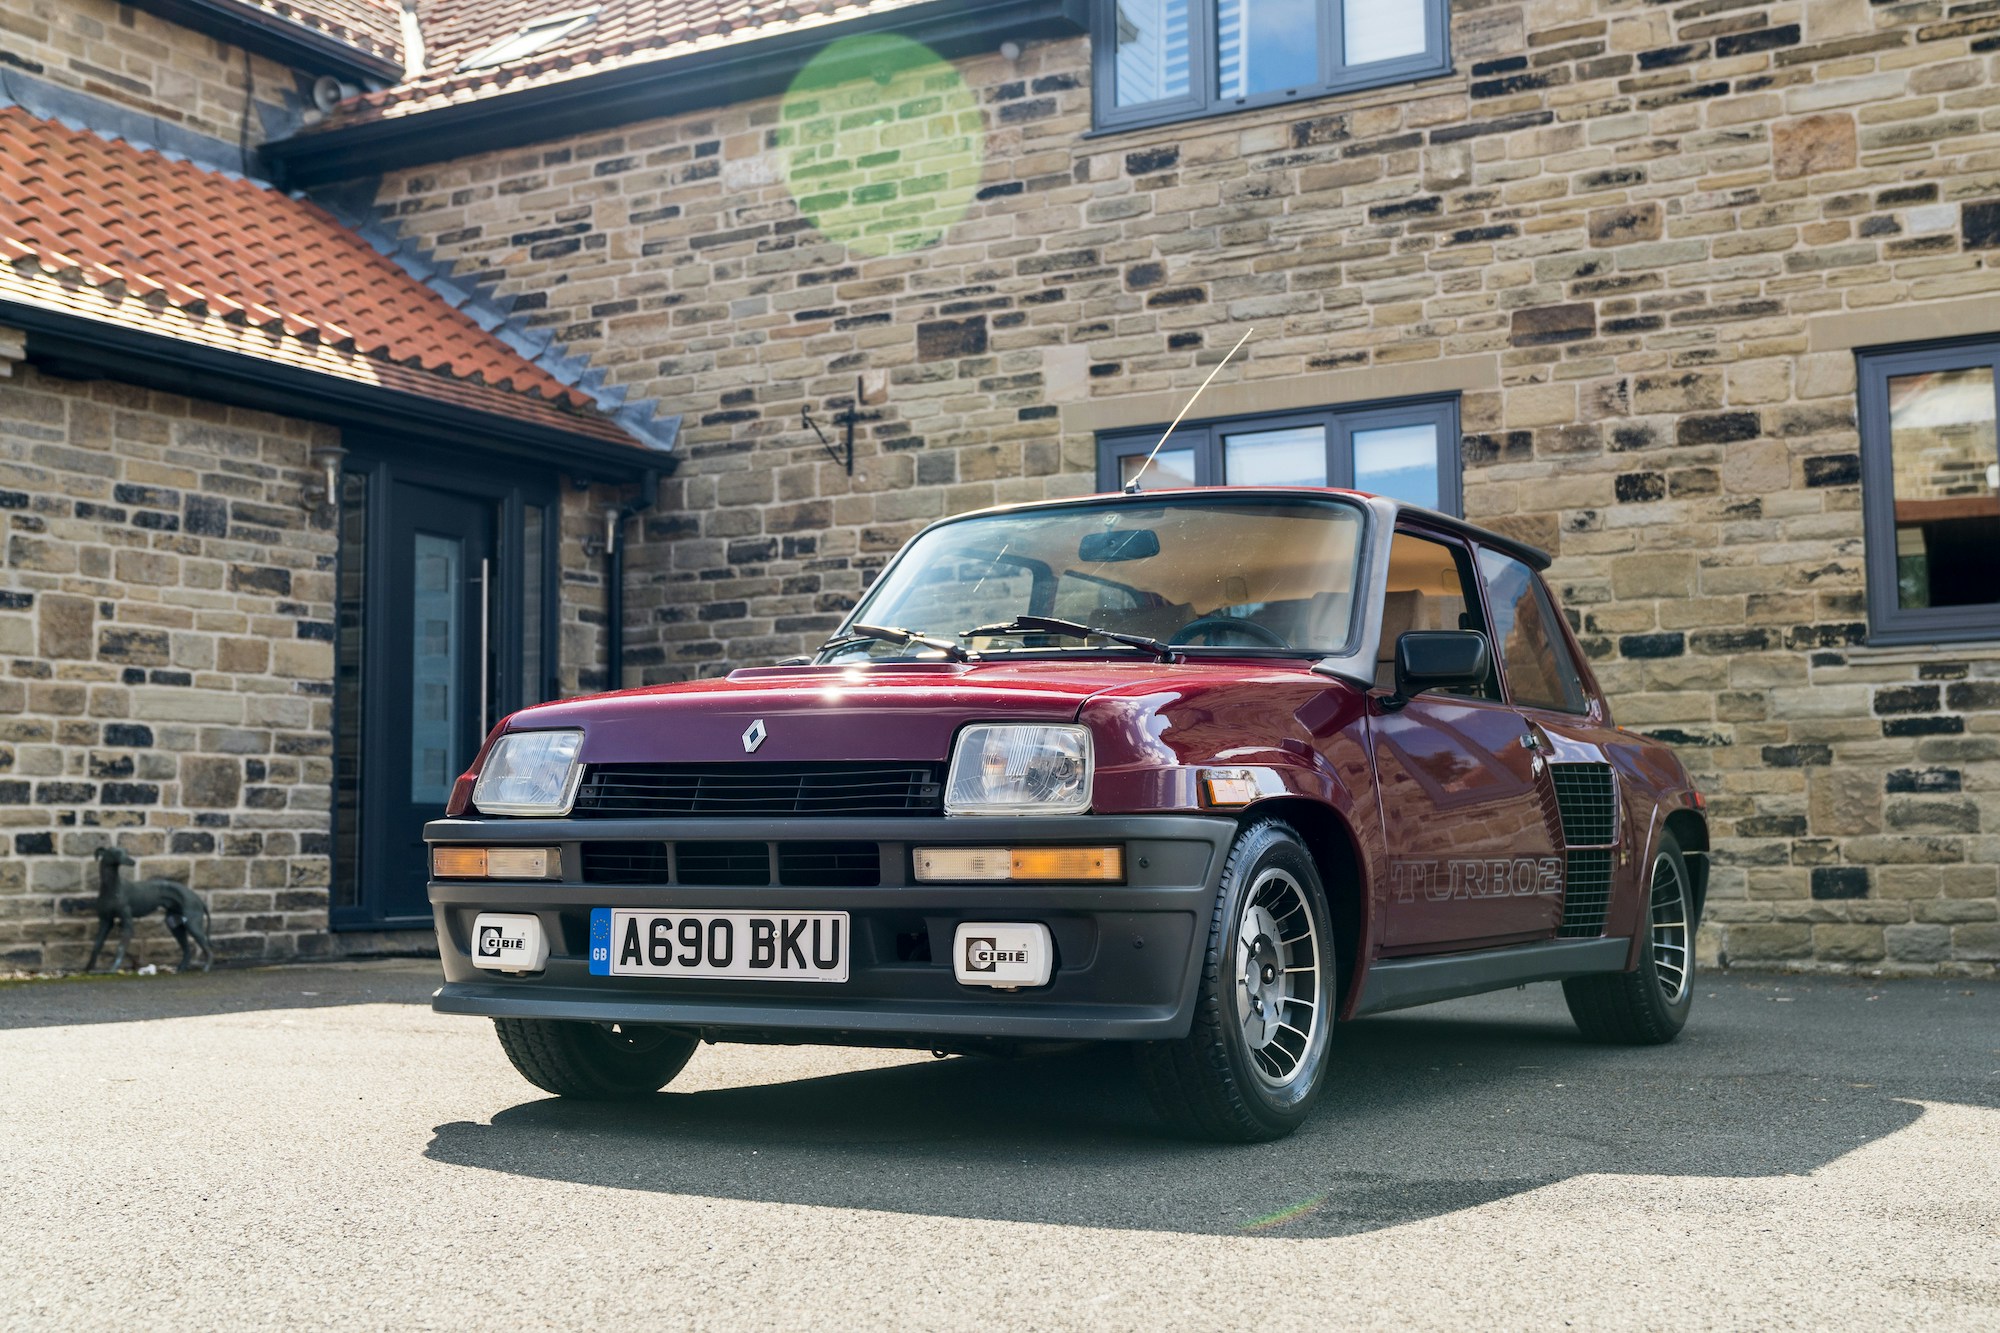 1984 RENAULT 5 TURBO 2 - 27,194 KM for sale by auction in West